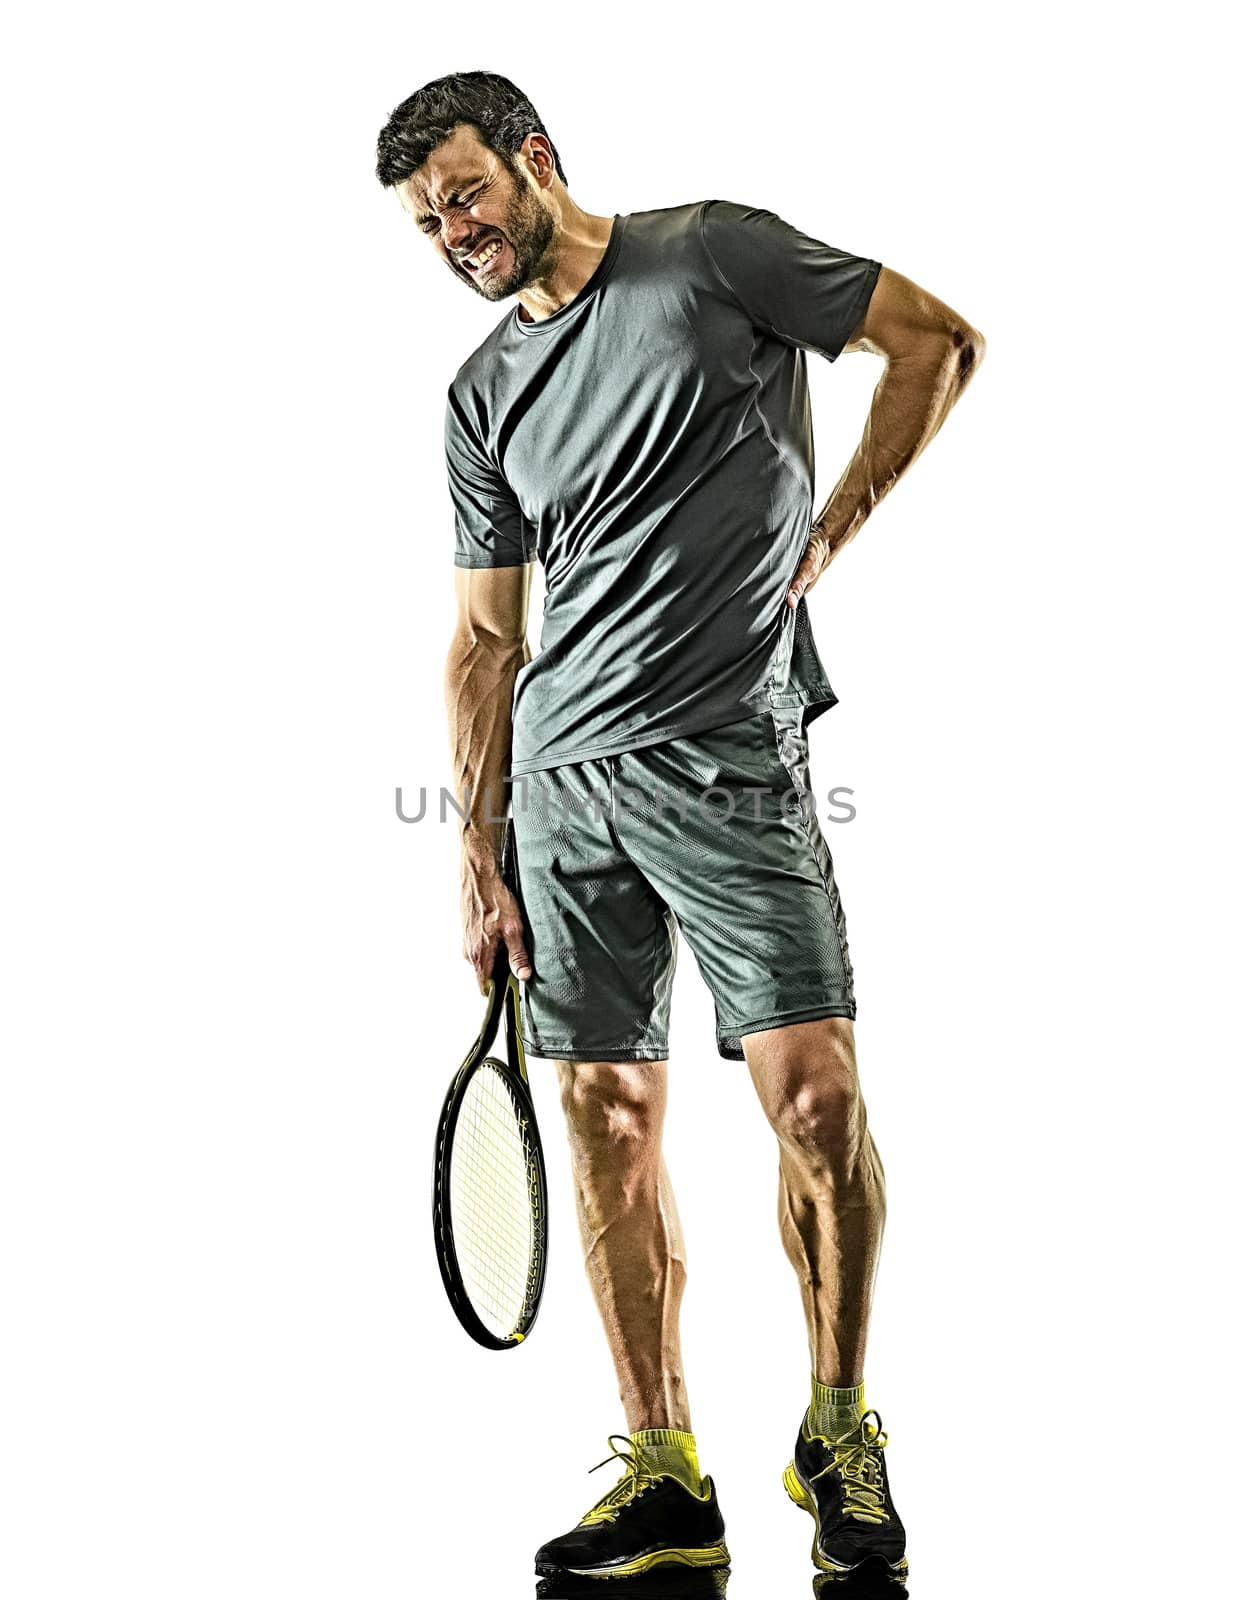 mature tennis player man physical pain injury isolated white background by PIXSTILL